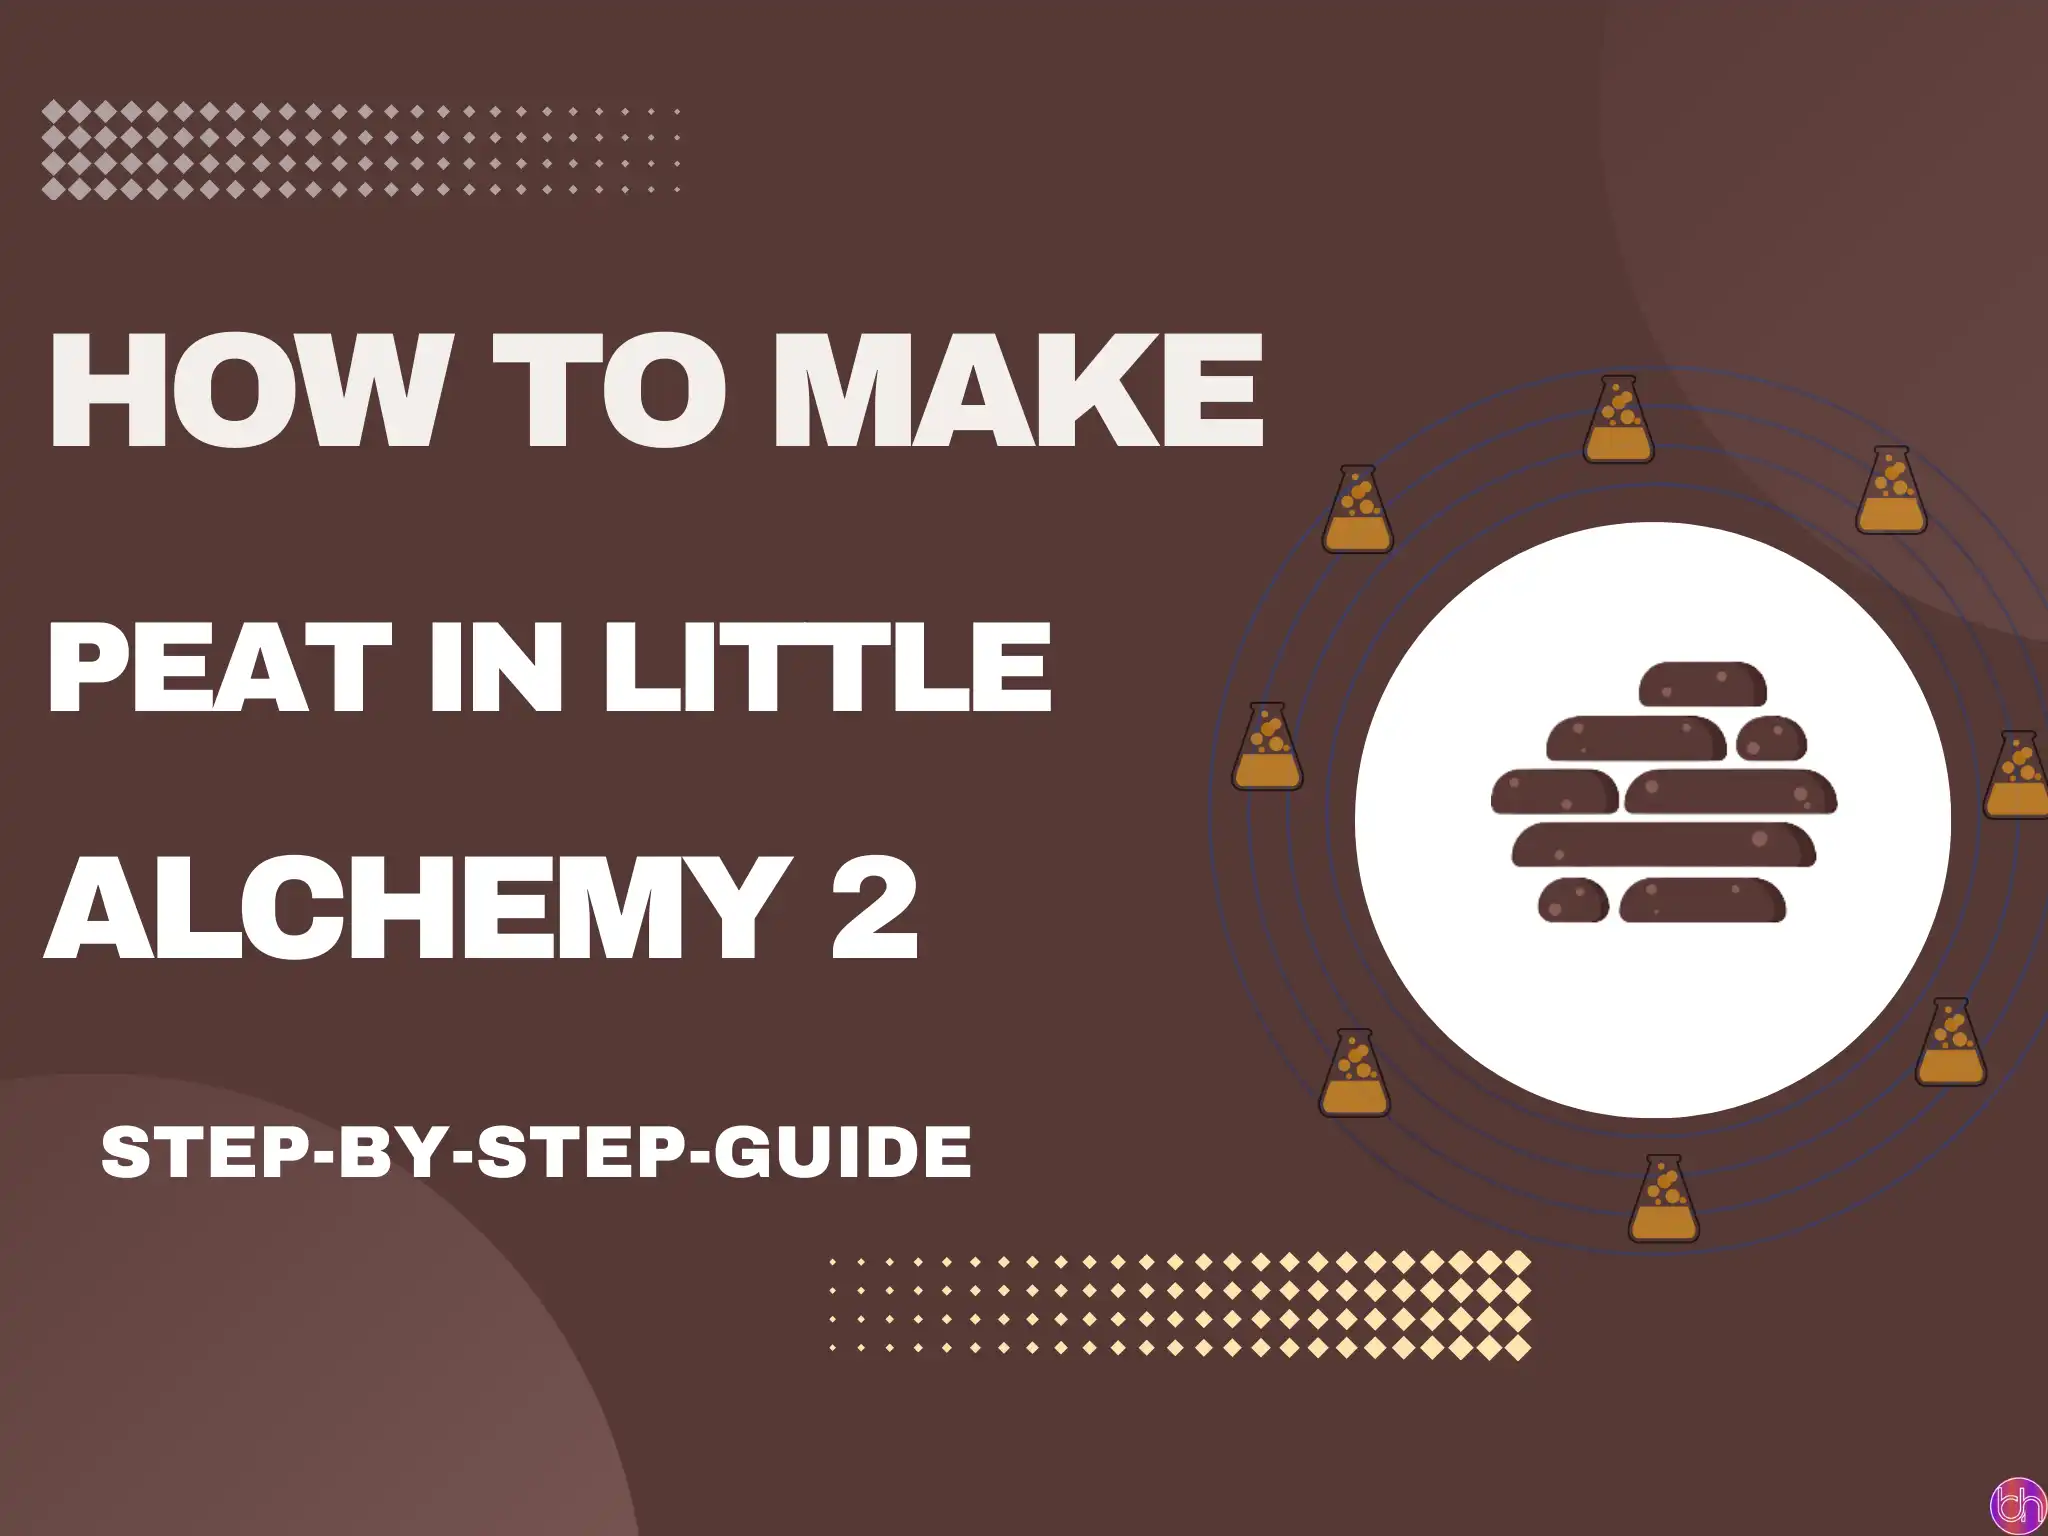 How to make Peat in Little Alchemy 2